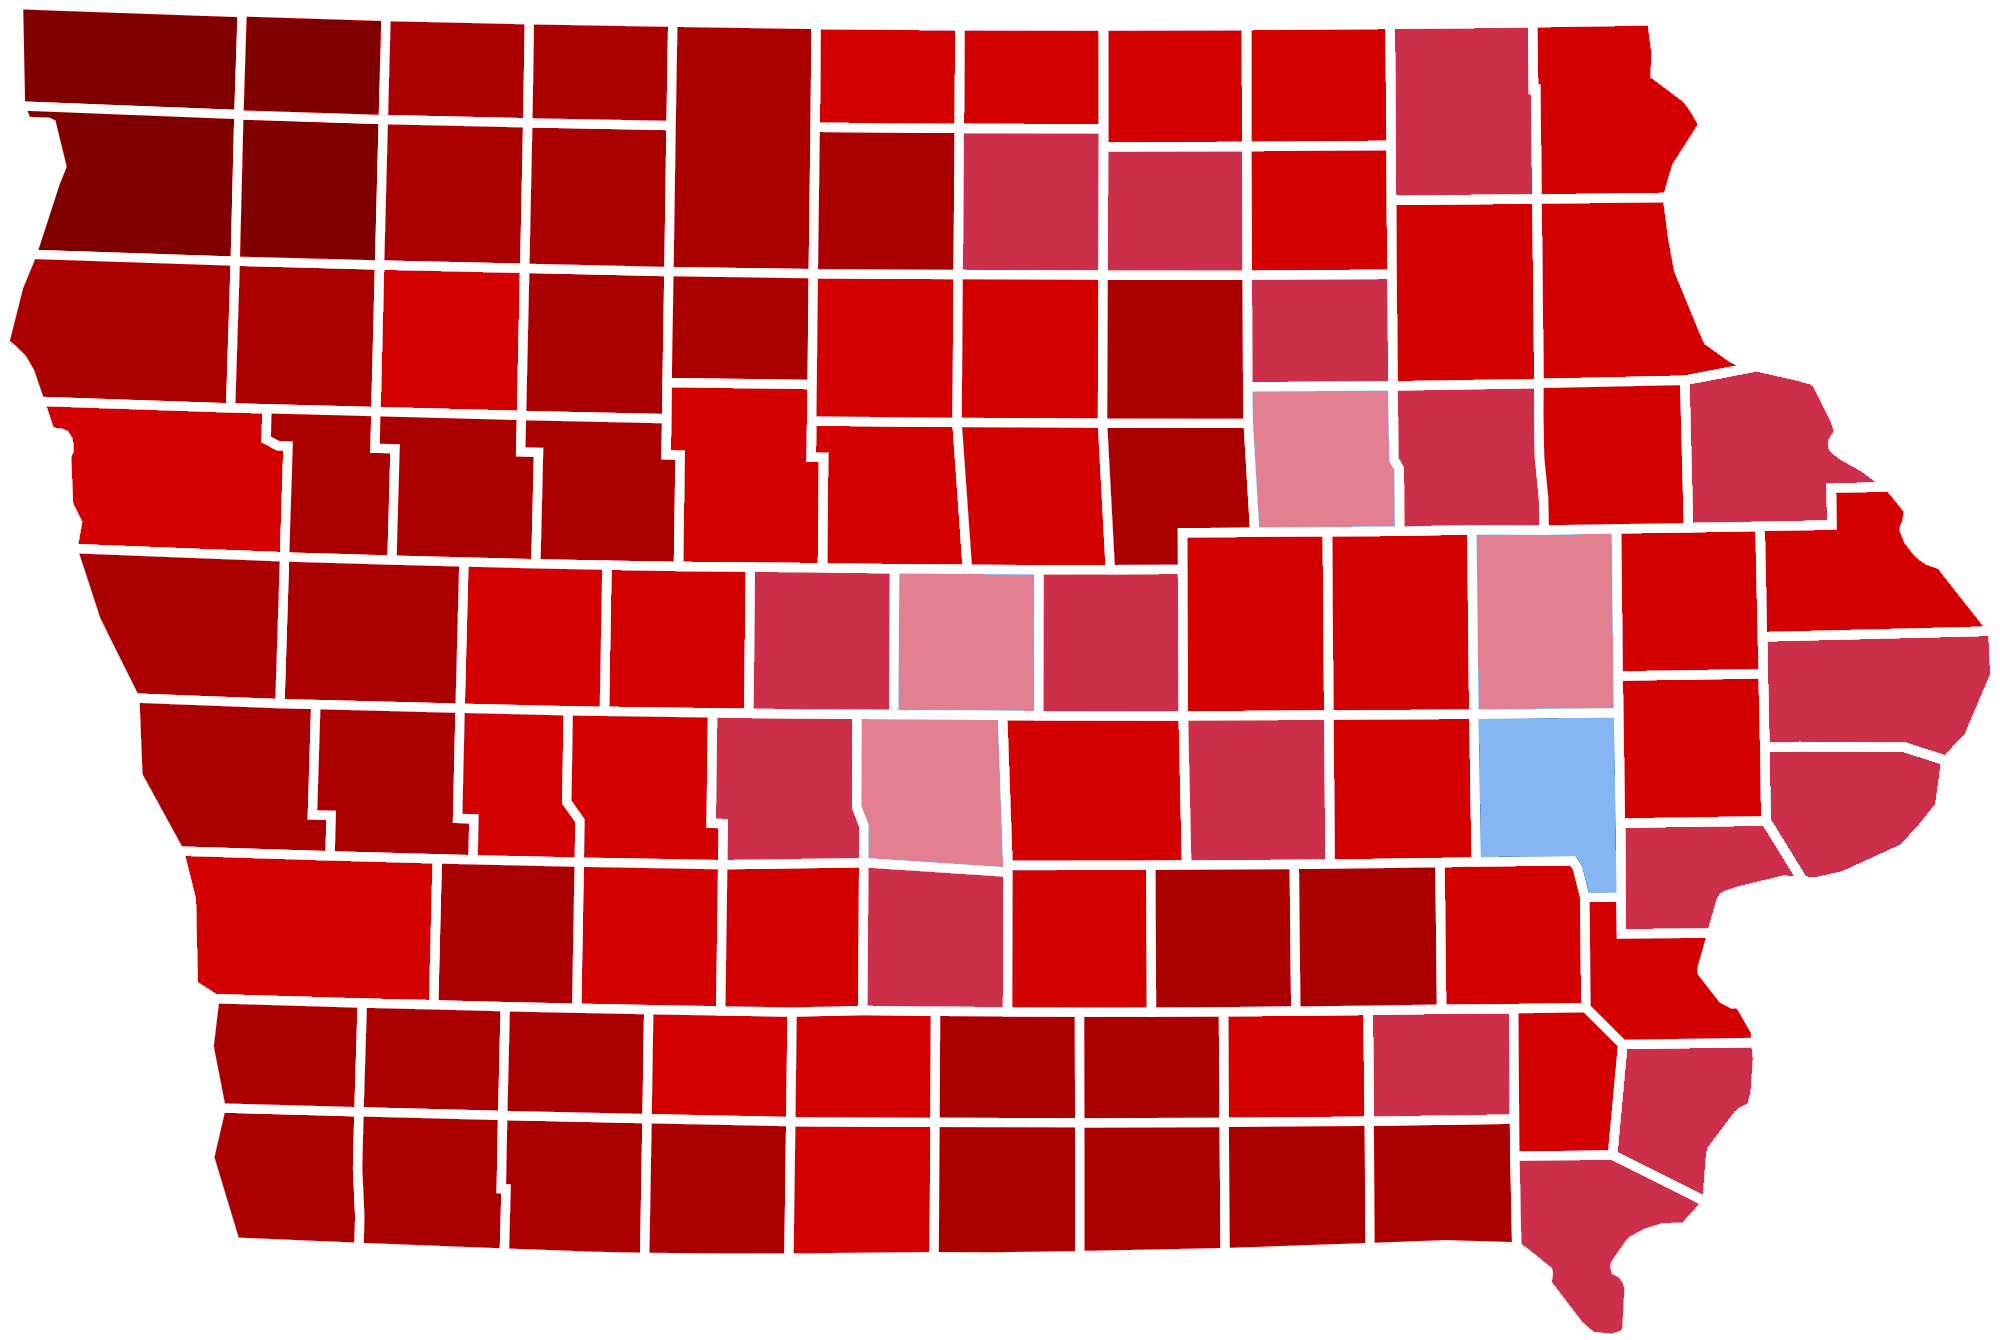 Iowa_Presidential_Election_Results_2016_Republican_Landslide_15.06%.png